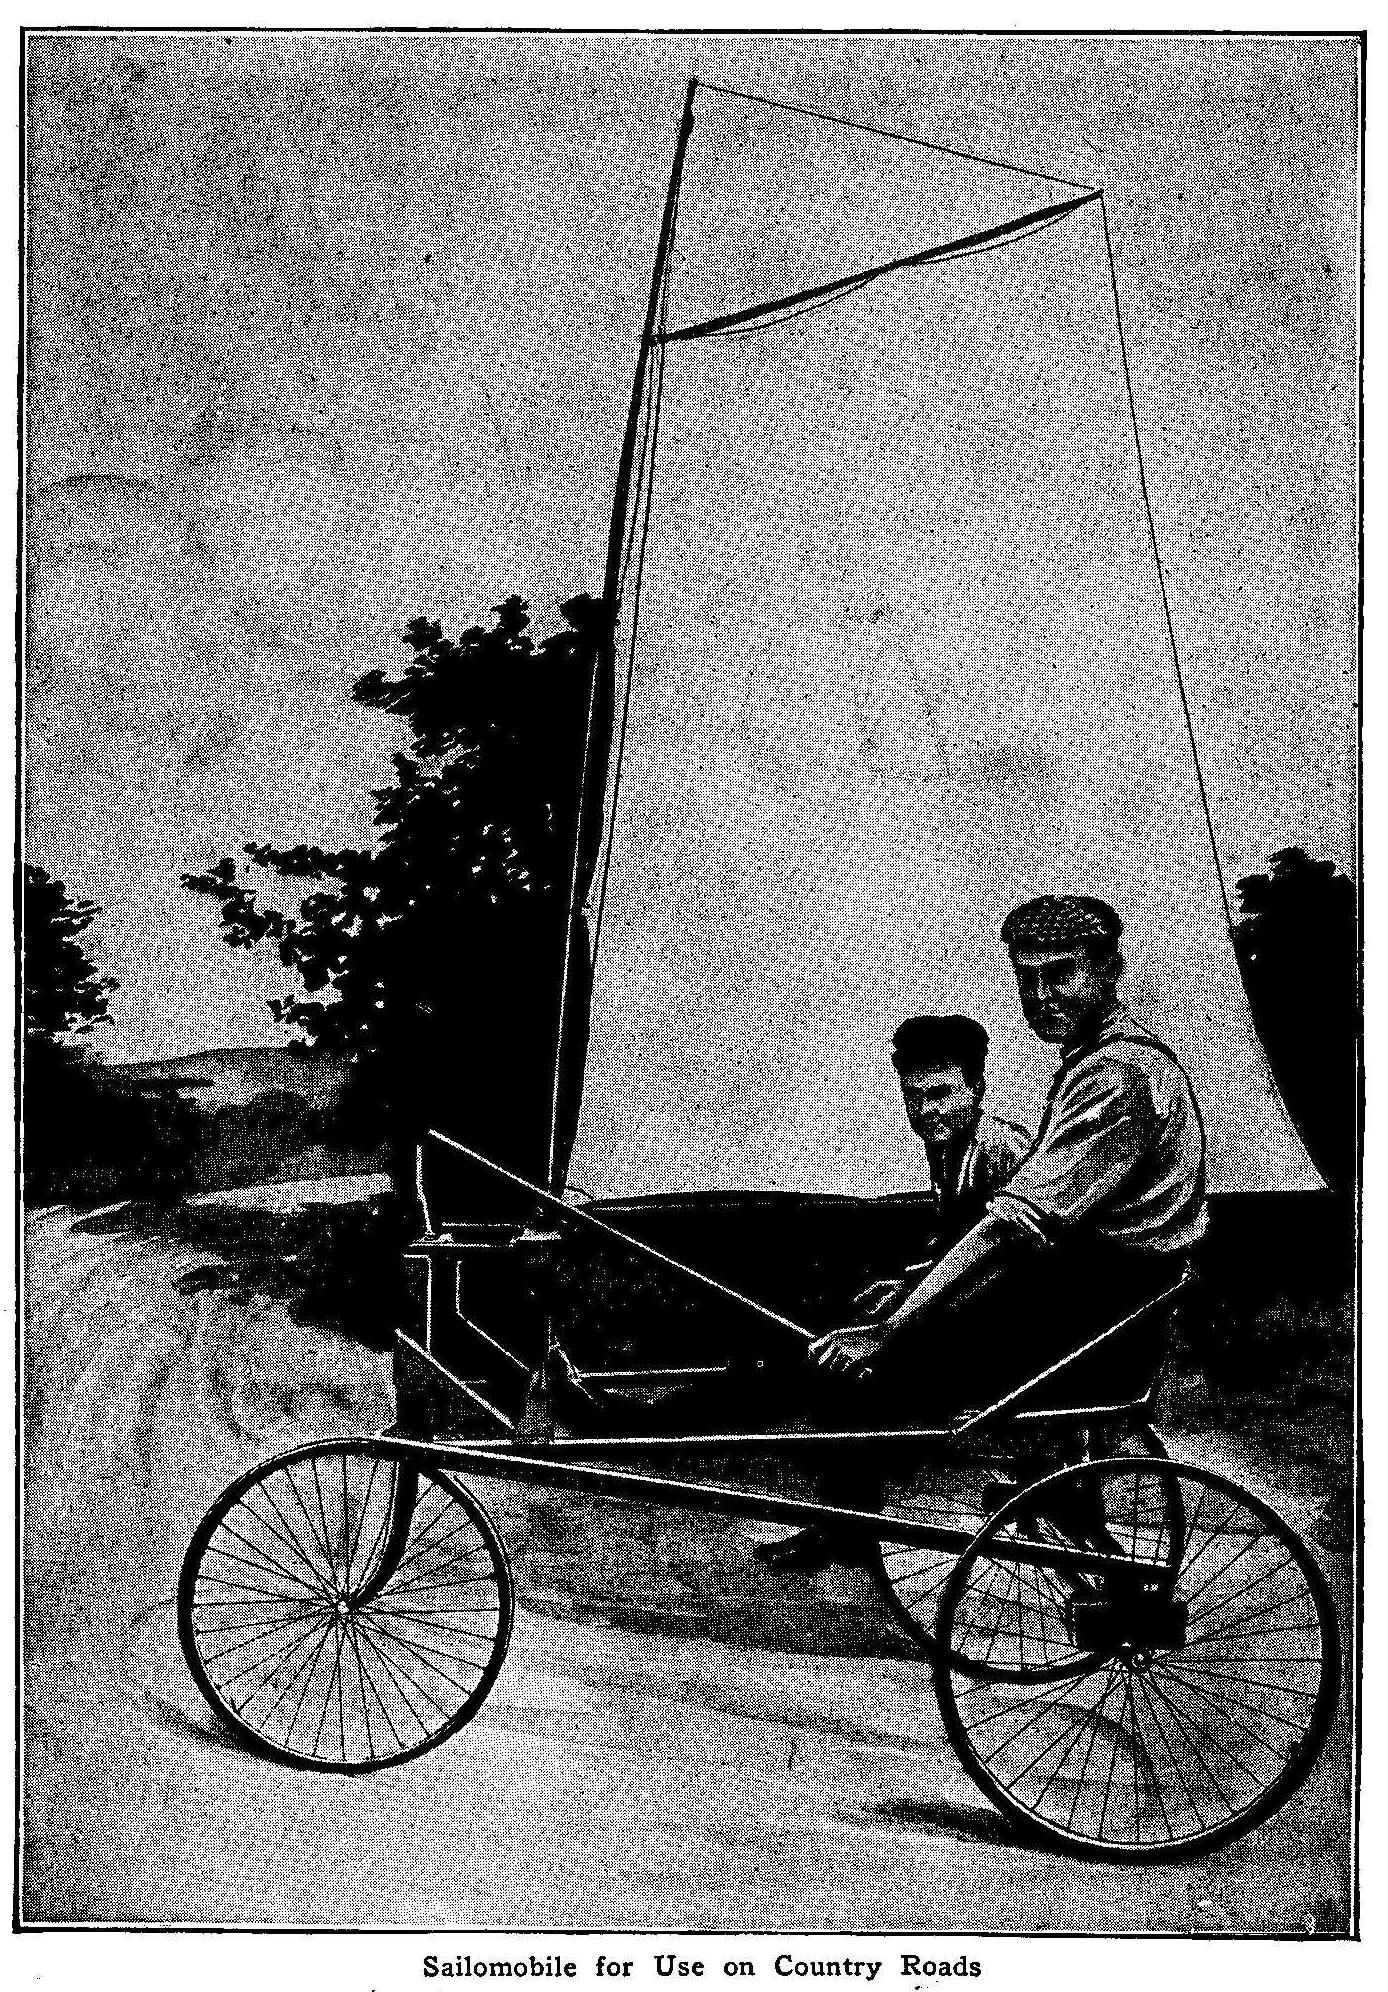 Sailomobile for Use on Country Roads